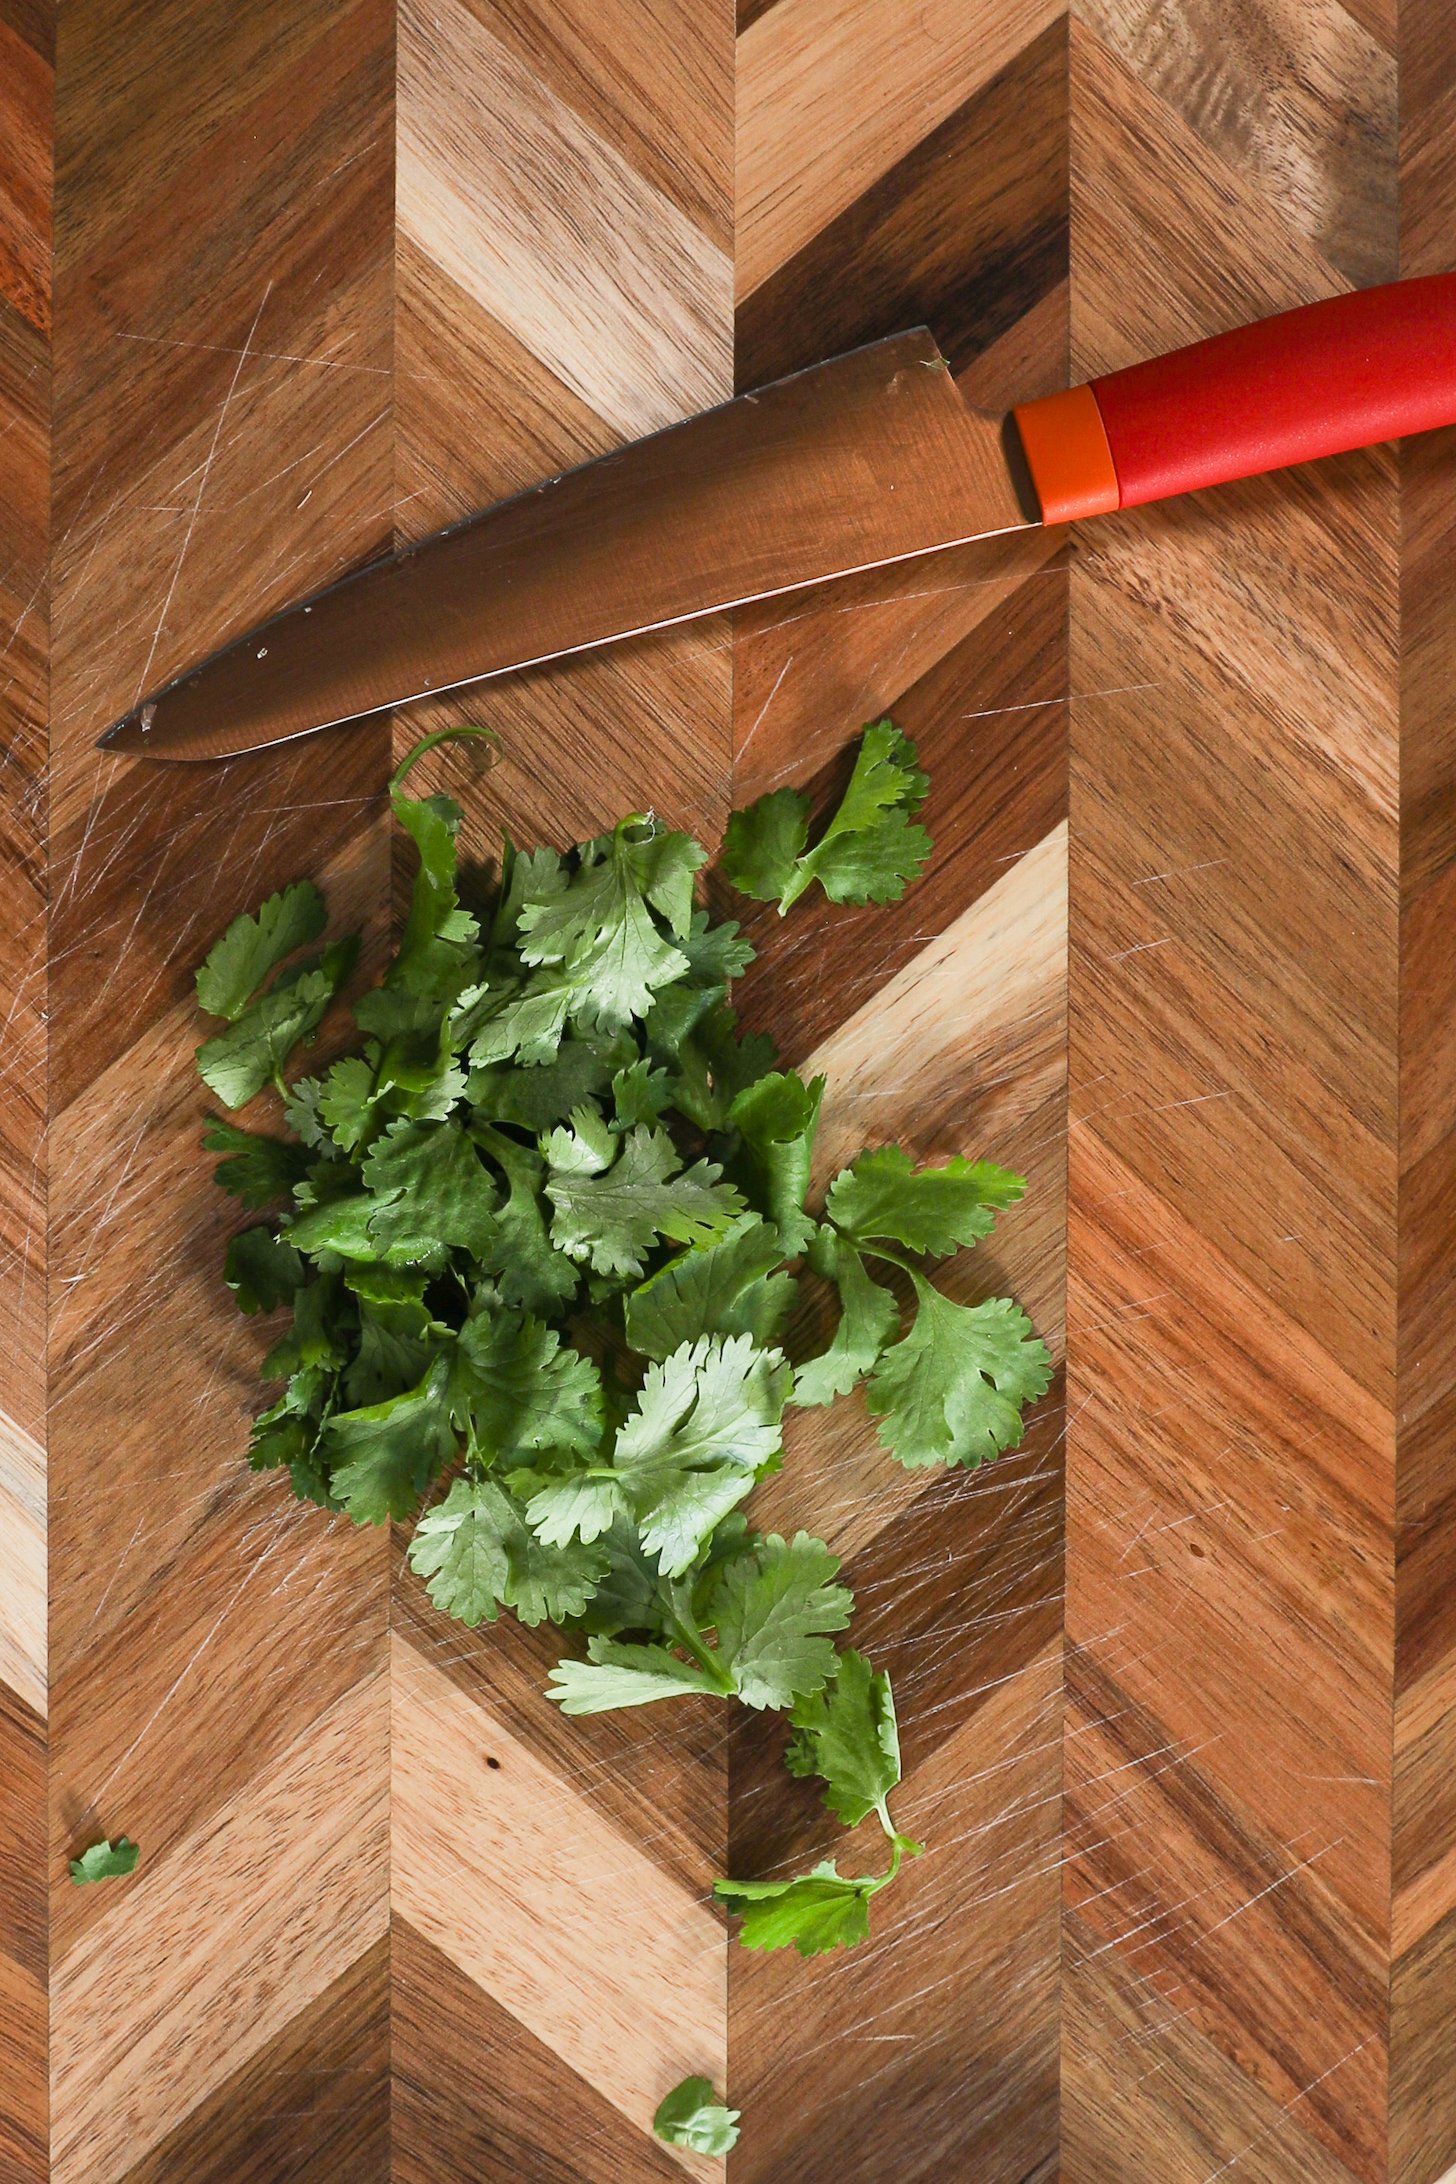 A close up shot of cilantro leaves with a red and gold knife on a checkered wooden board.